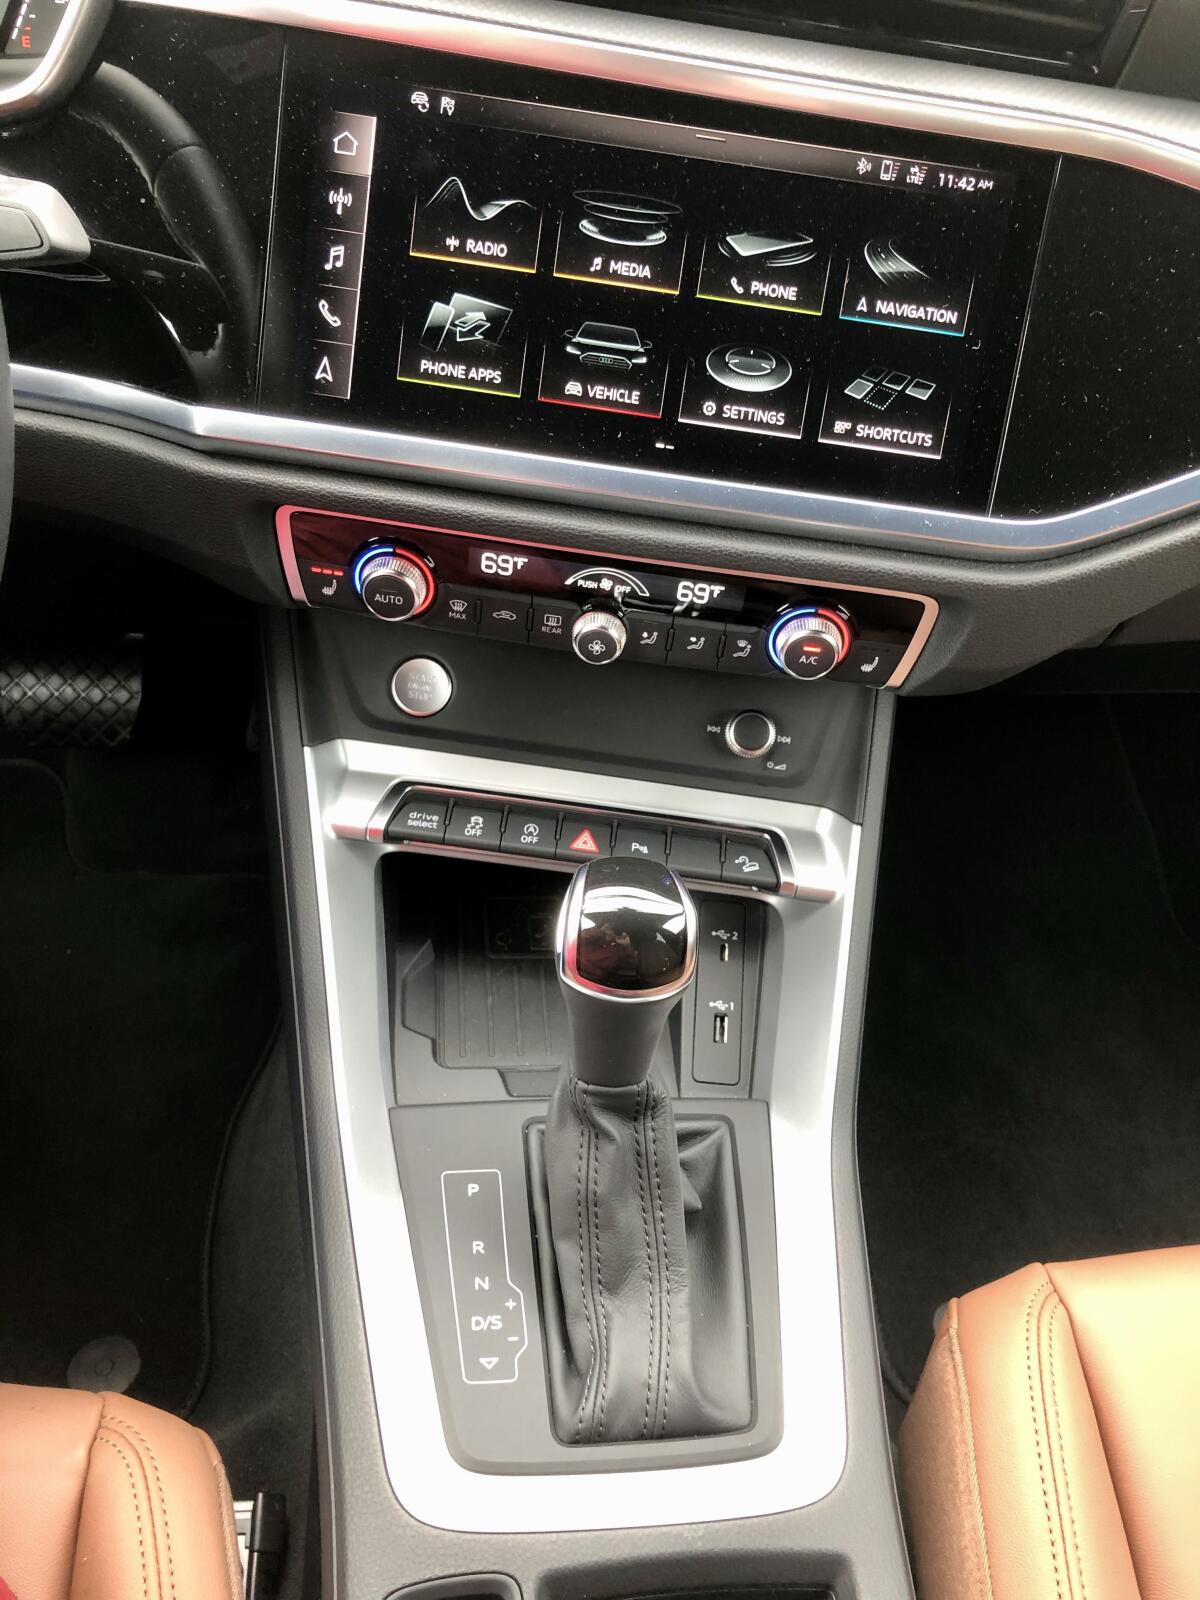 The shift console is substantial with a large e-bin for wireless charging and two USBs, one of which is a Type C.